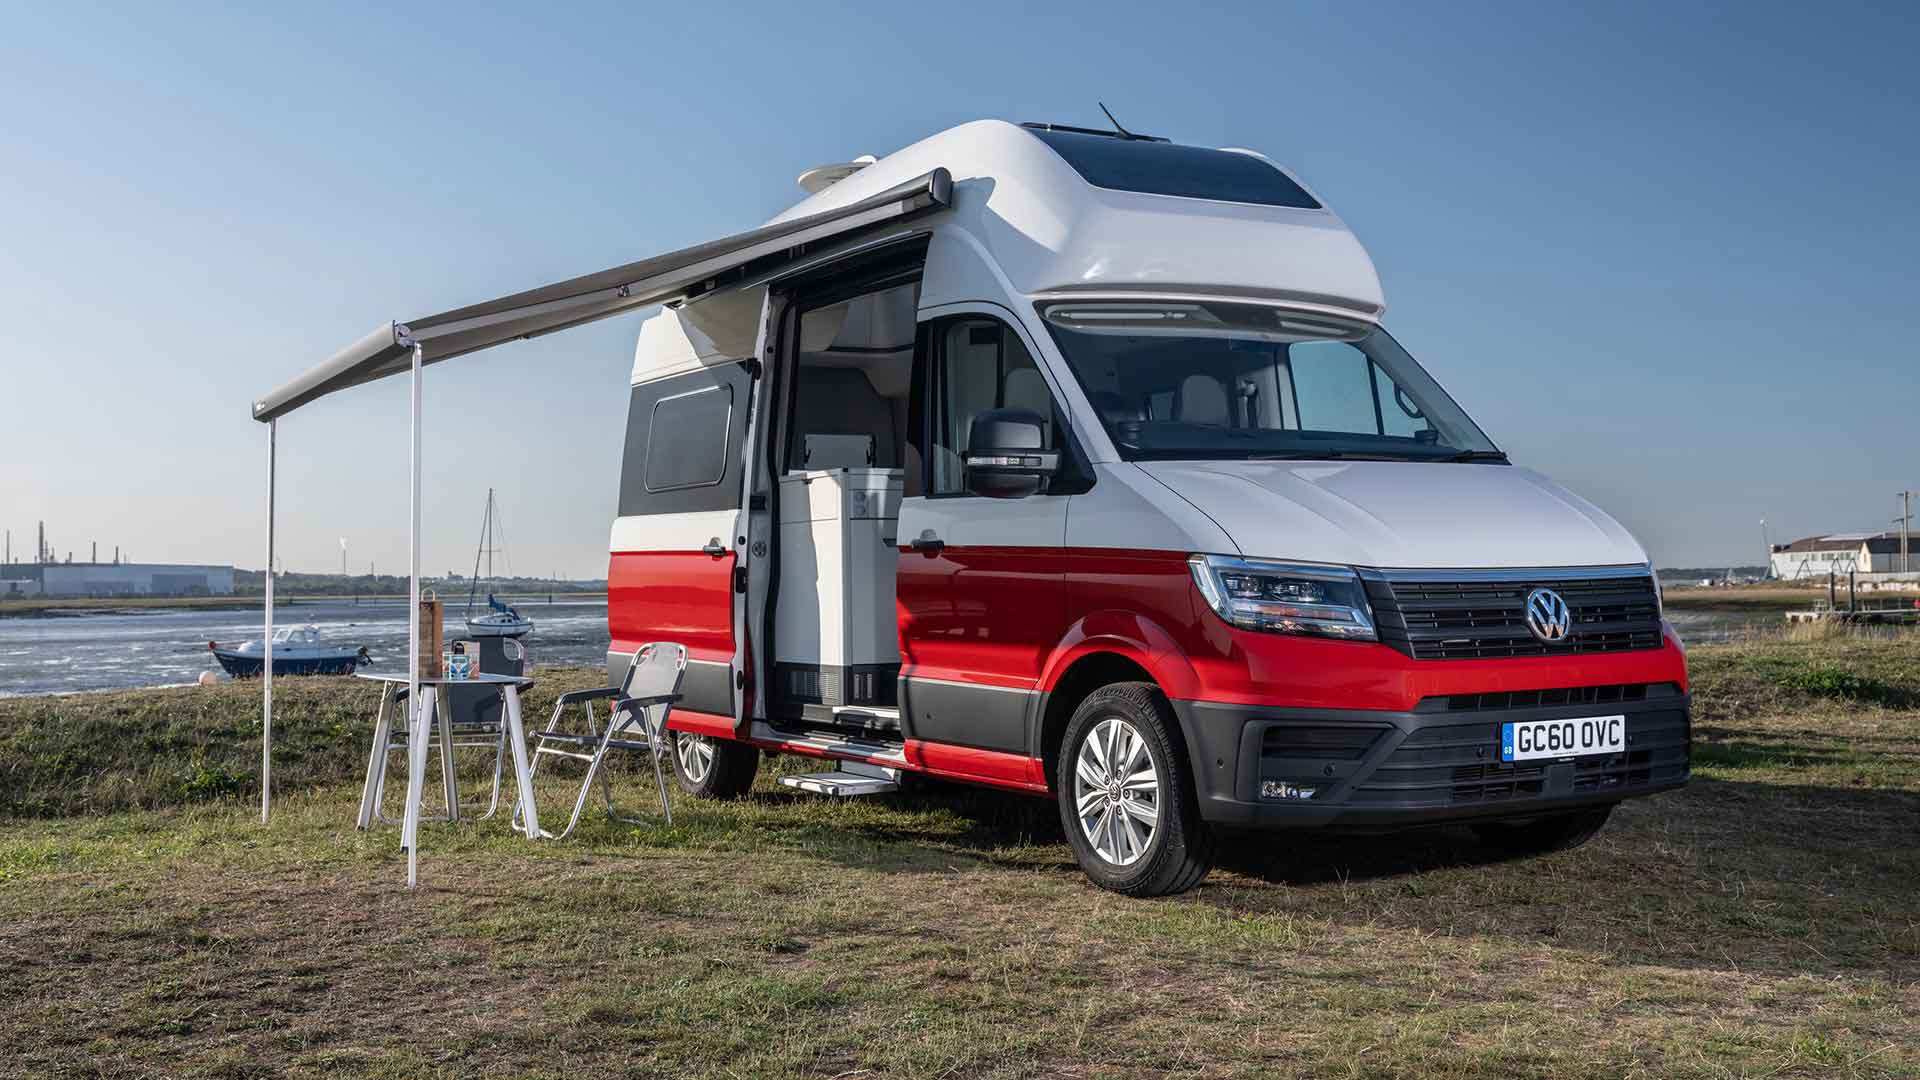 Used Volkswagen Campers for Sale | Auto Trader Motorhomes